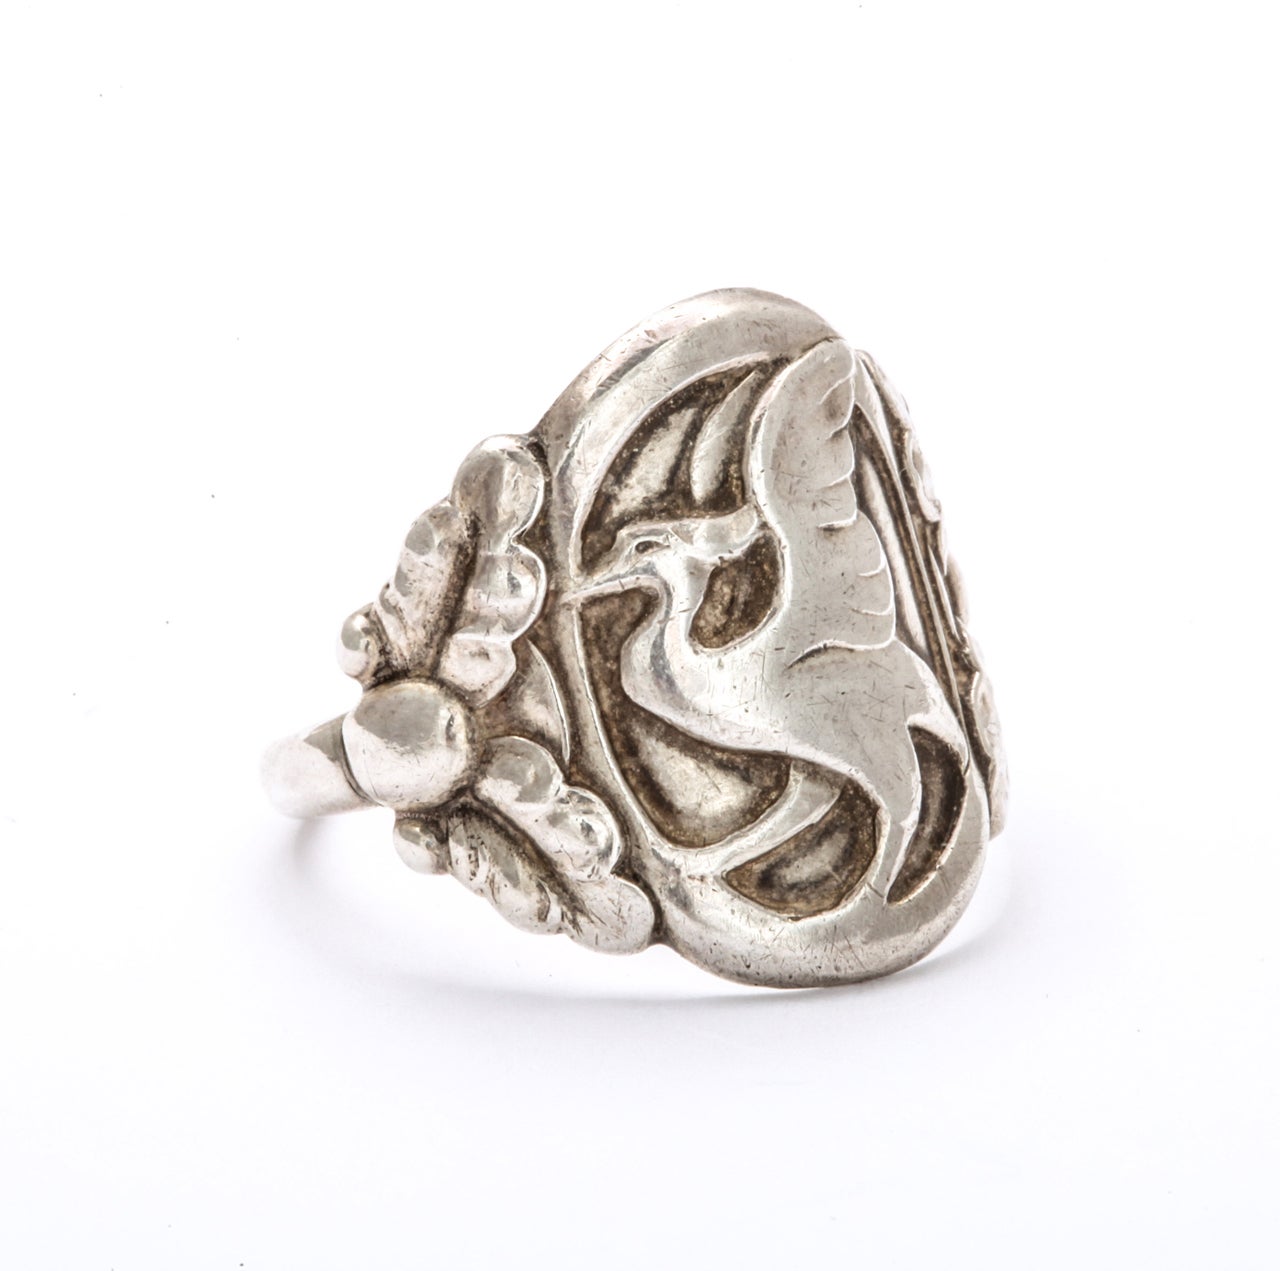 A 1930's Georg Jensen Silver Ring is engraved with the image of a powerful bird  with a smile in its eye. The bird is possibly a griffon that appears to have just landed from flight.  The shoulders of the ring are detailed with large chased or